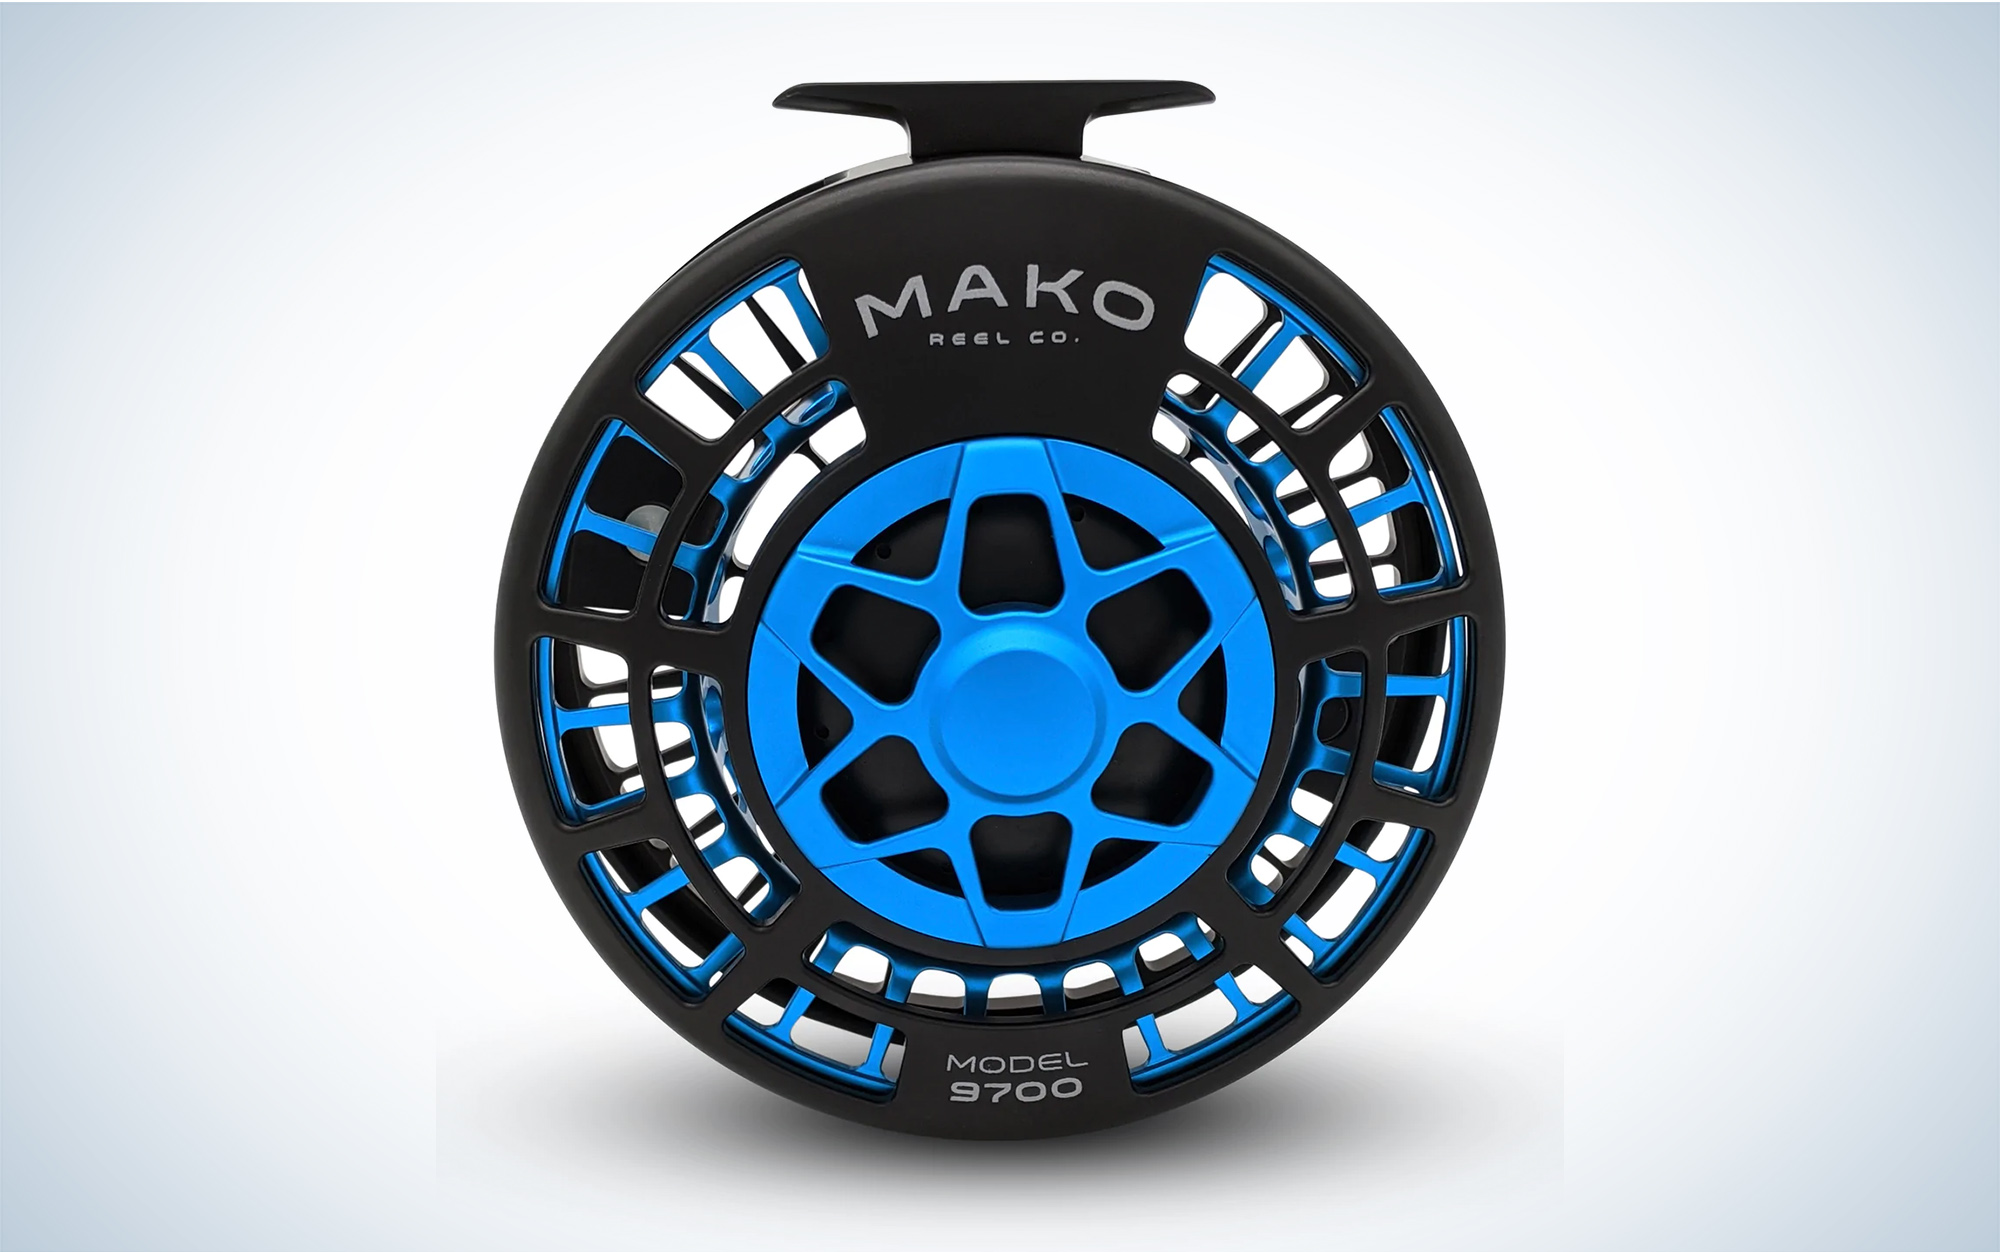 The Mako Model 9700B is the best offshore.